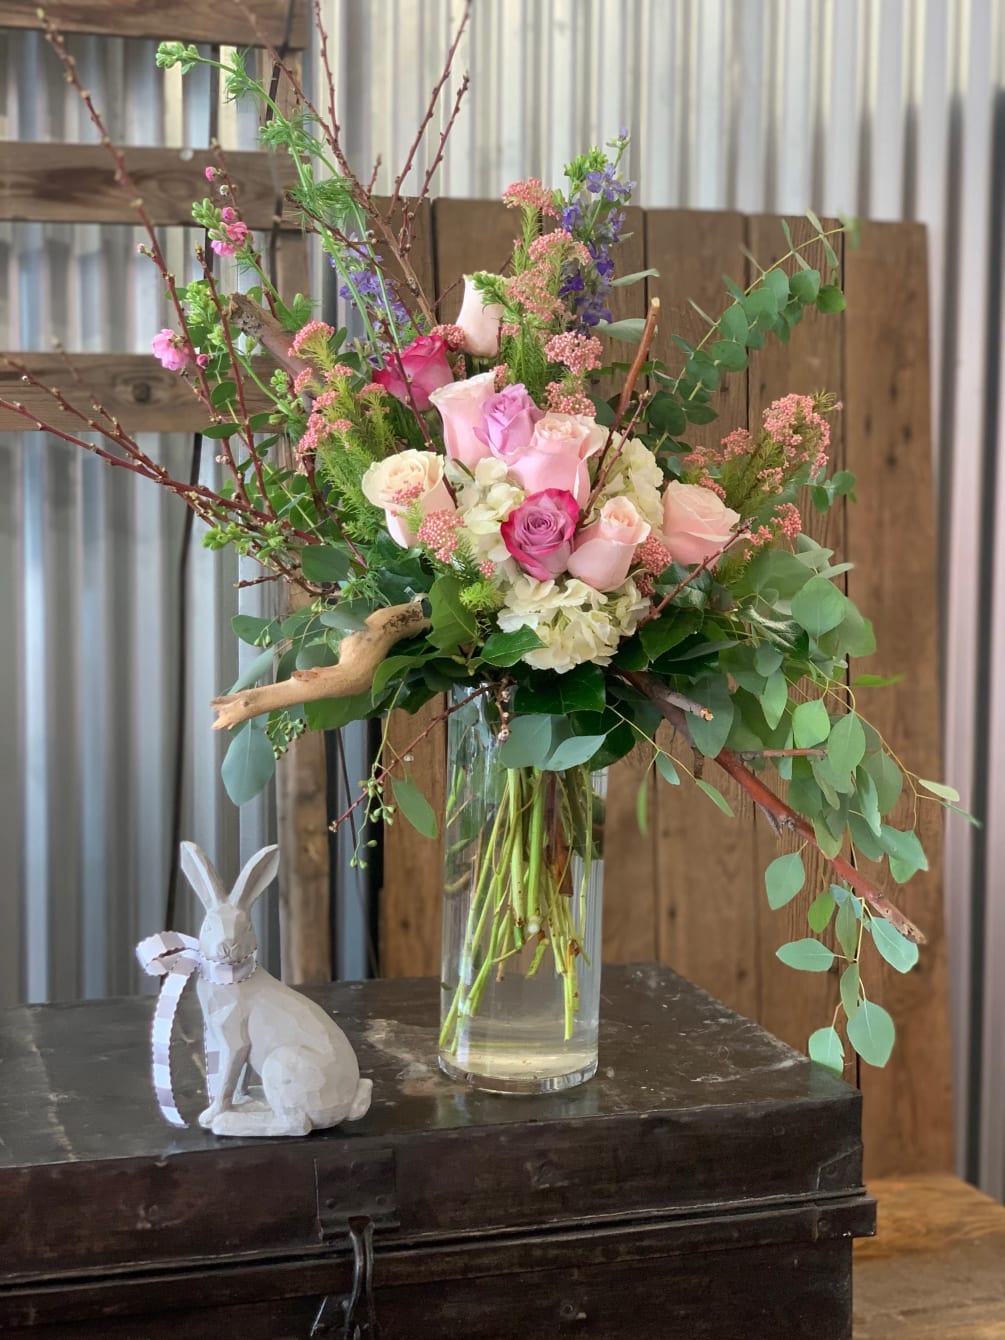 Stunning arrangement made up of spring textures. Perfect for any occasion!

Pictured: [DELUXE]